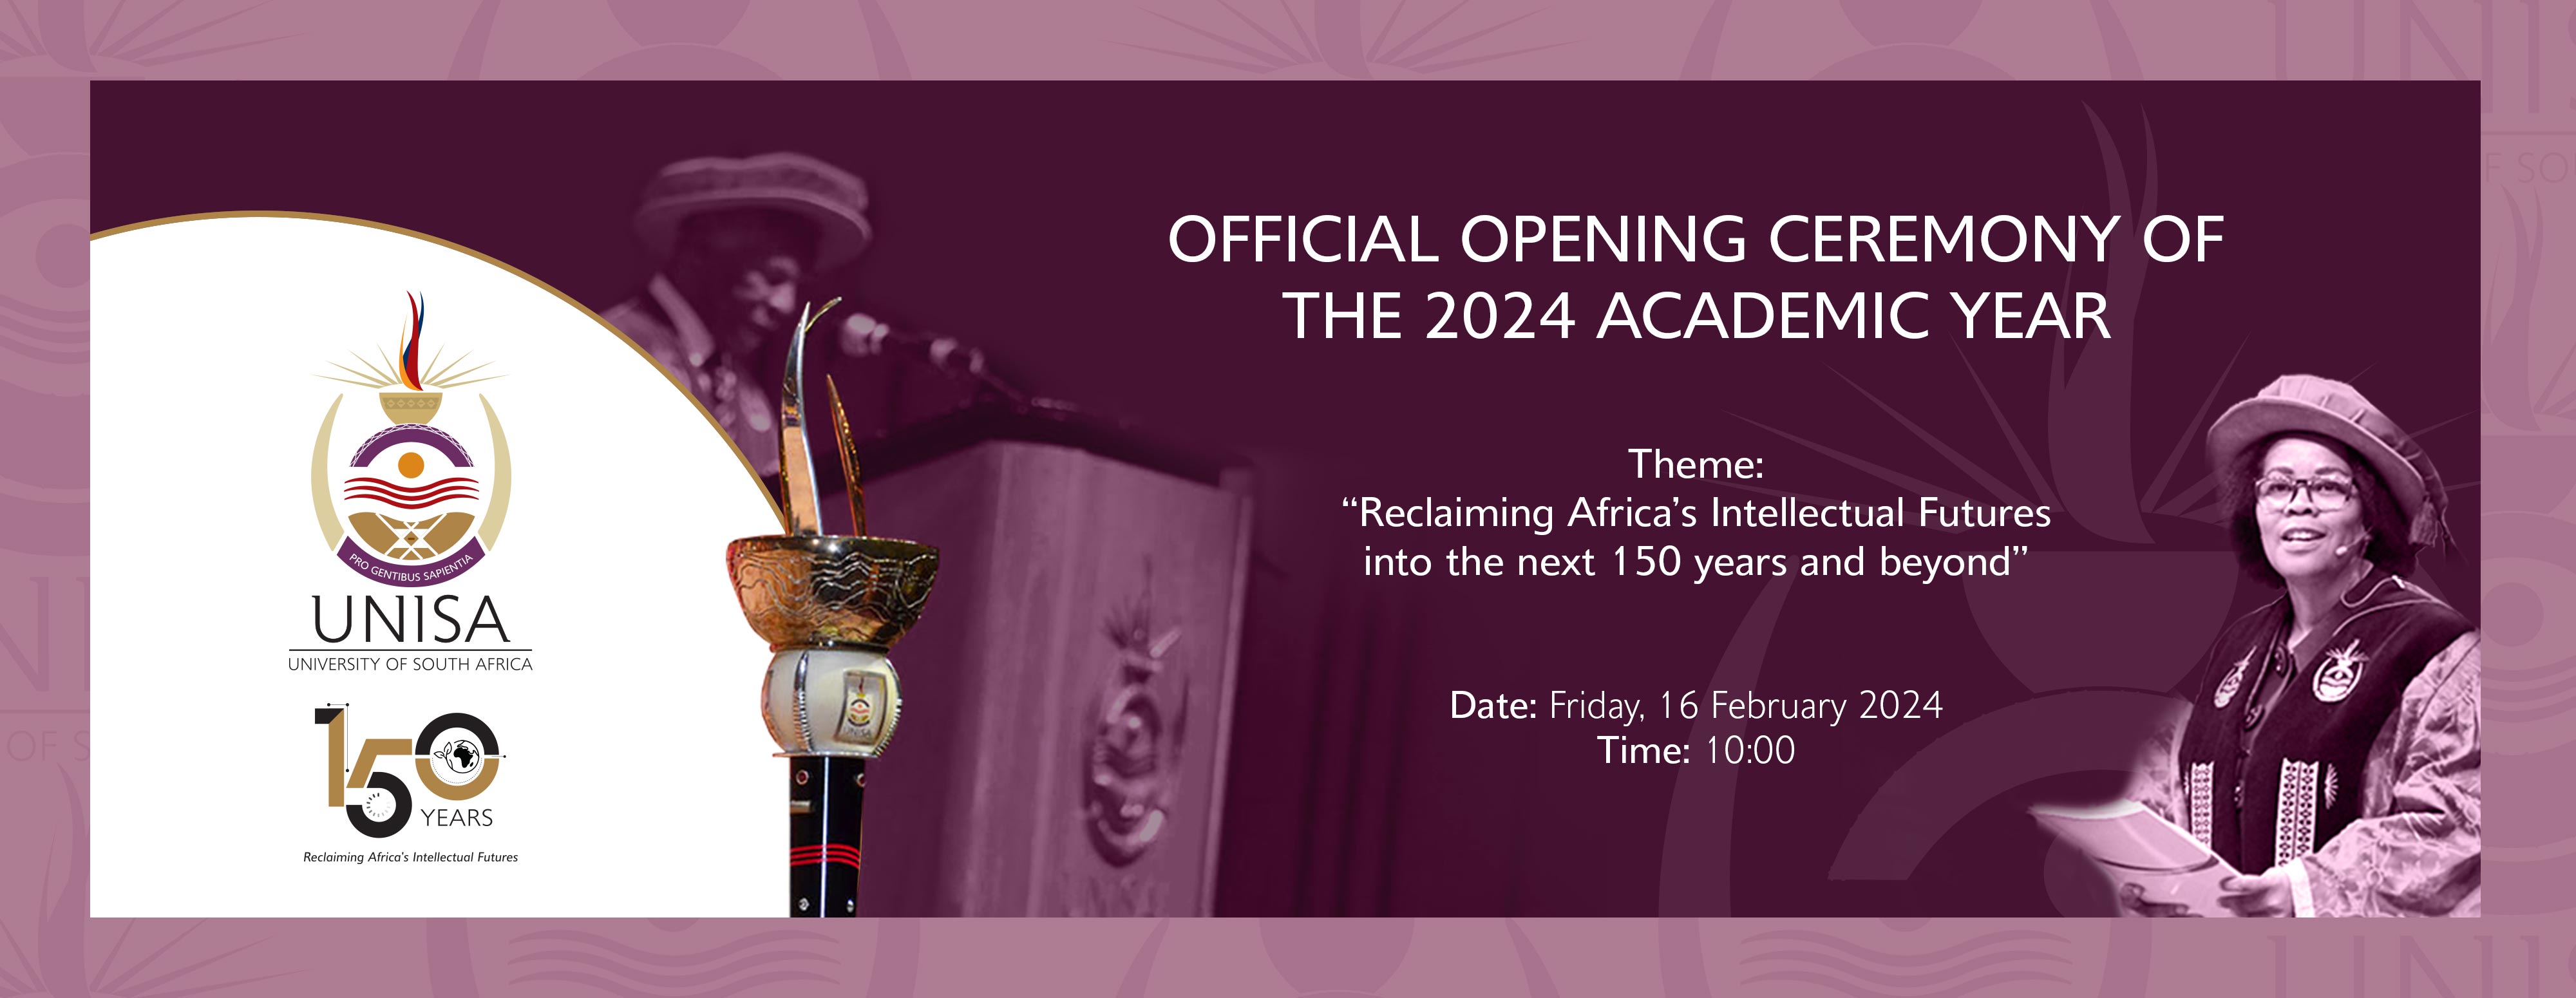 Unisa gears up for the official opening ceremony of its 2024 Academic Year